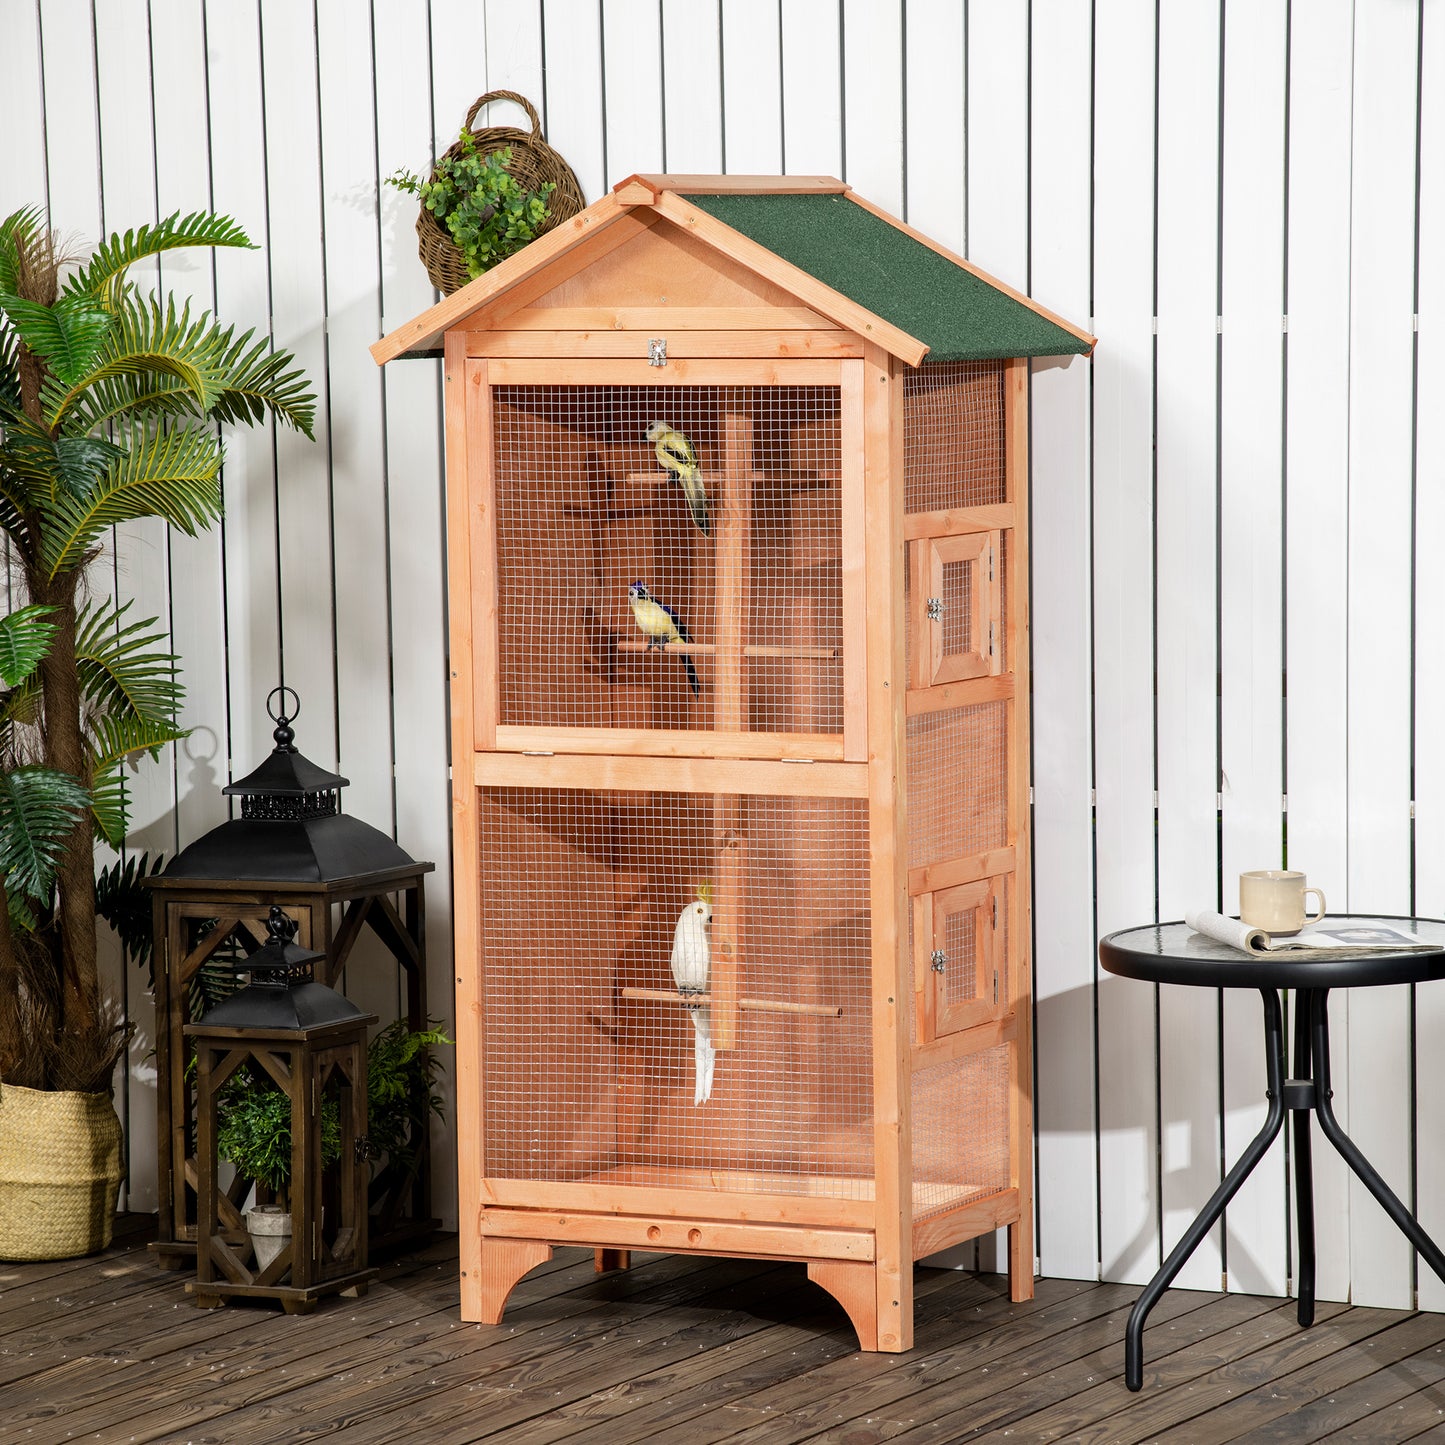 Wooden Bird Aviary Parrot Cage Pet Furniture with Removable Bottom Tray, 2 Doors, Asphalt Roof, 4 Perches, Orange at Gallery Canada